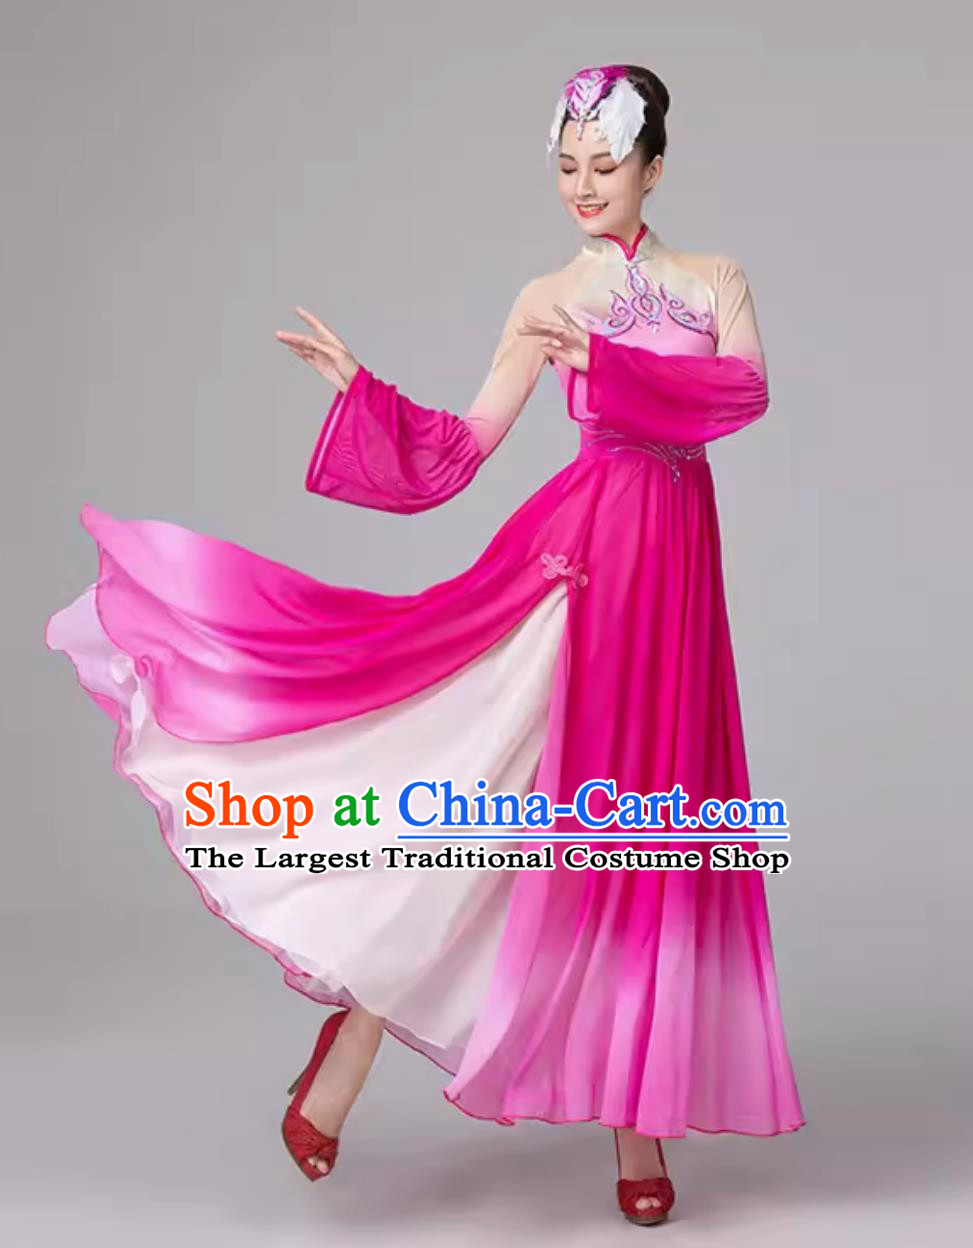 China Taoli Cup Dance Competition Costume Elegant Big Display Performance Clothing Fan Dance Chinese Classical Dance Pink Dress